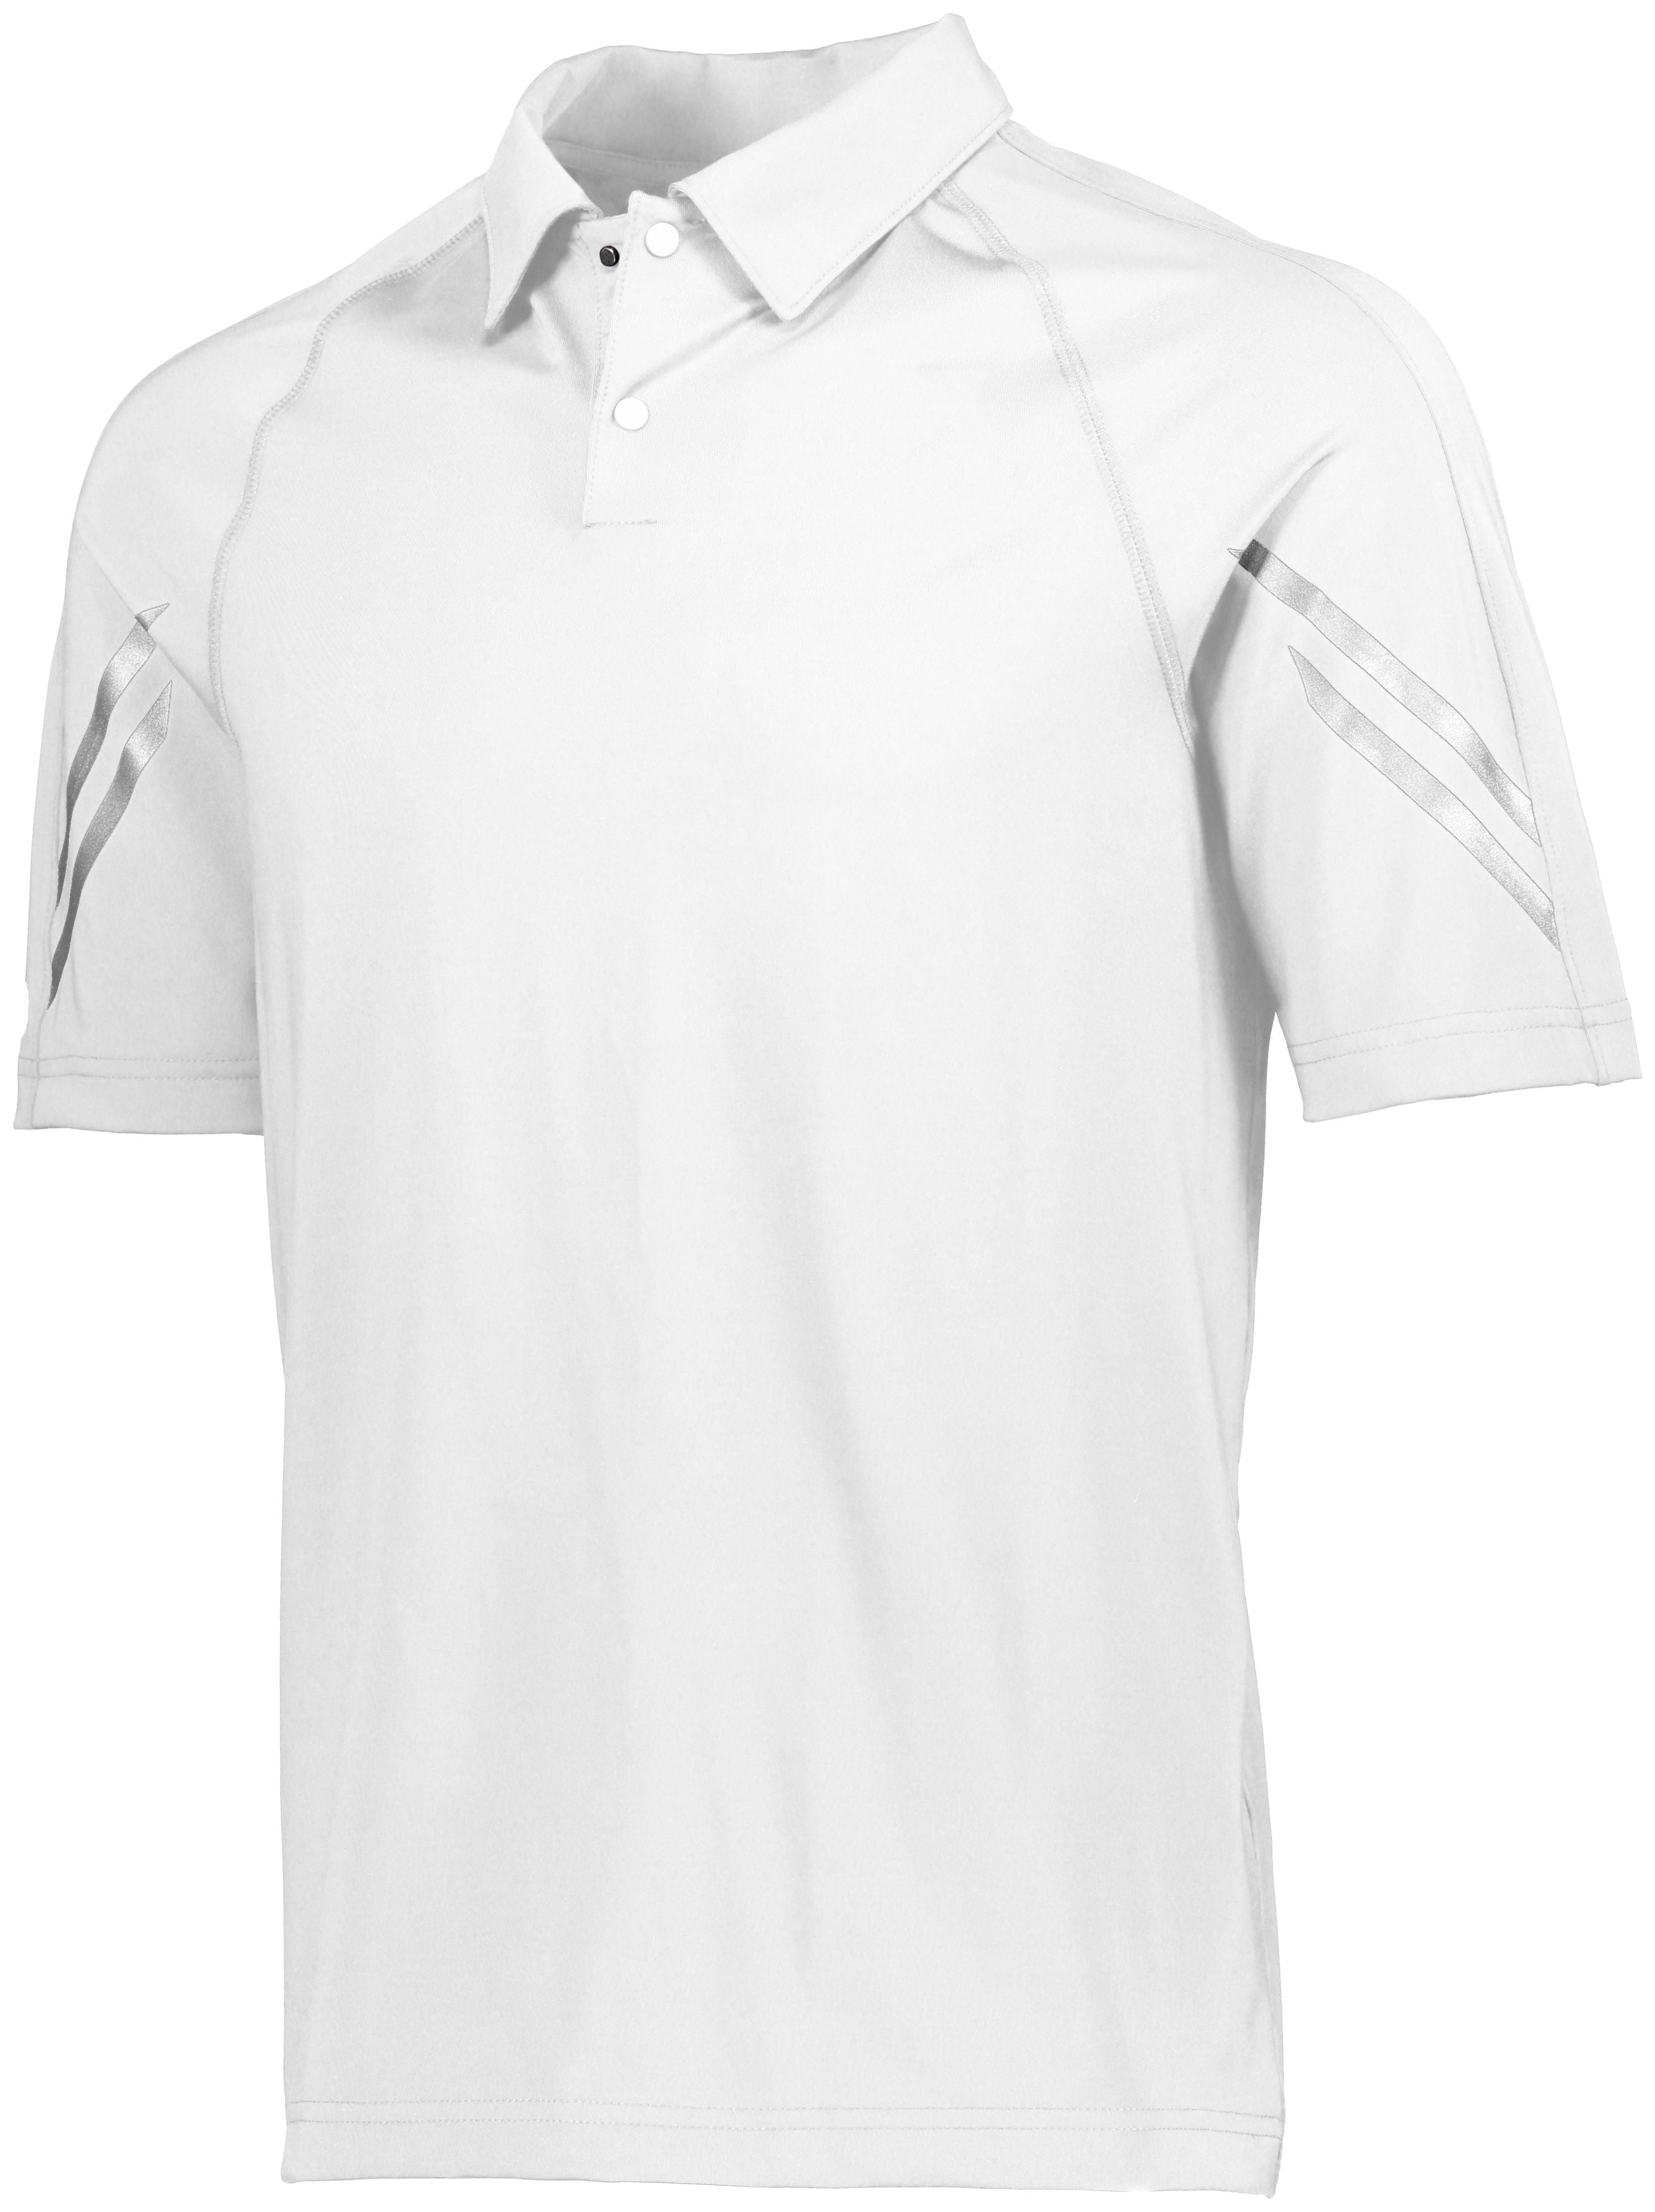 Holloway Flux Polo in White  -Part of the Adult, Adult-Polos, Polos, Holloway, Shirts, Flux-Collection, Corporate-Collection product lines at KanaleyCreations.com